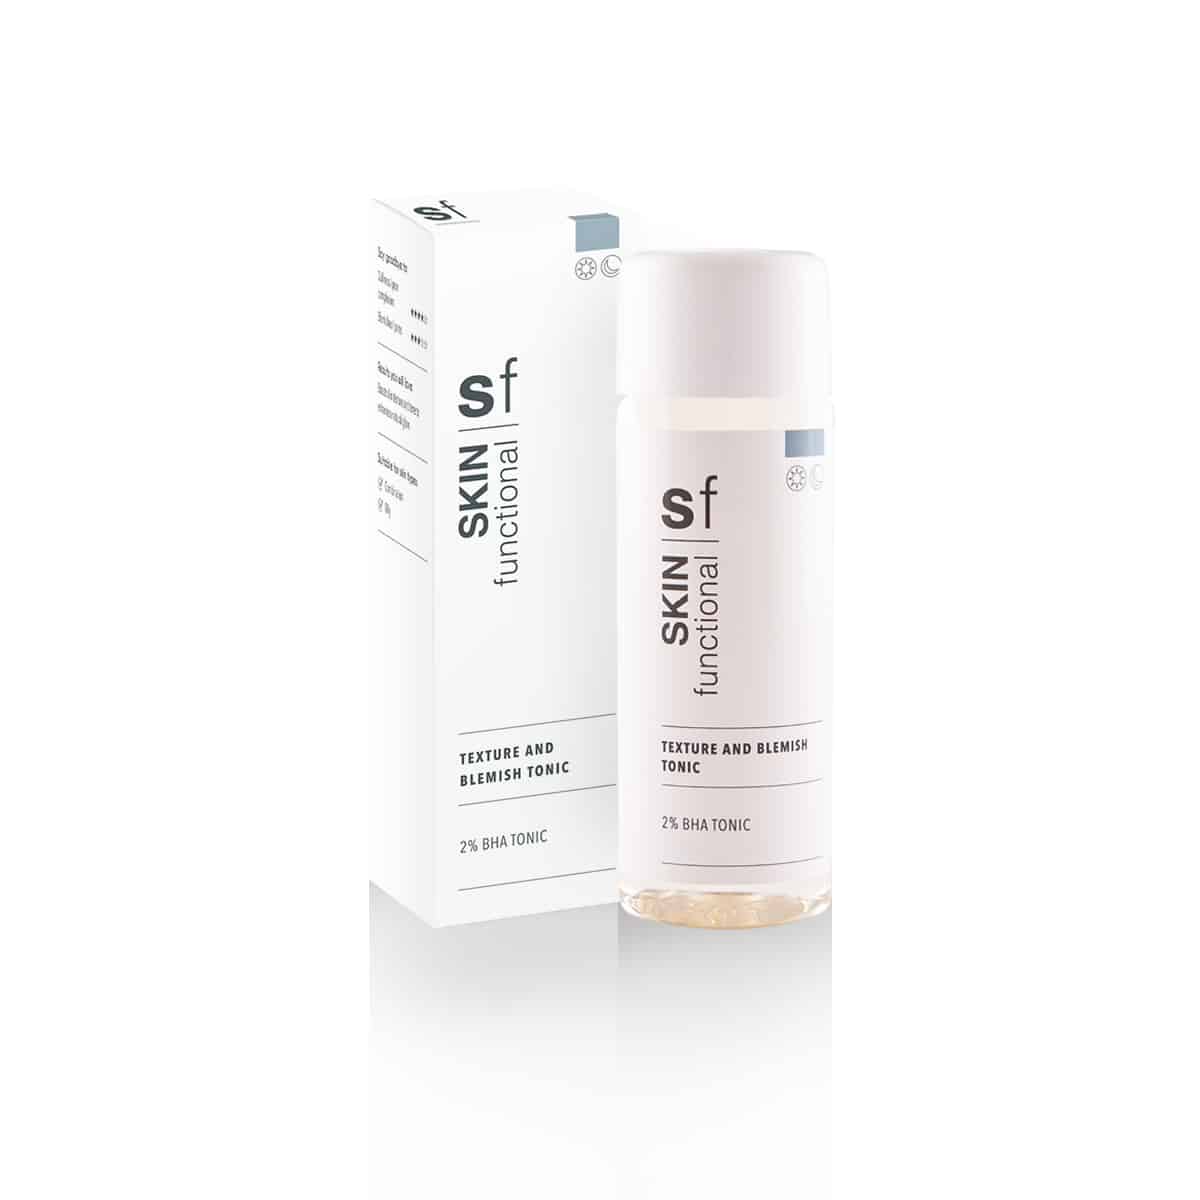 A bottle of SKIN Functional - 2% BHA Tonic - Texture and Blemish Tonic, a skincare cleanser, on a white background.